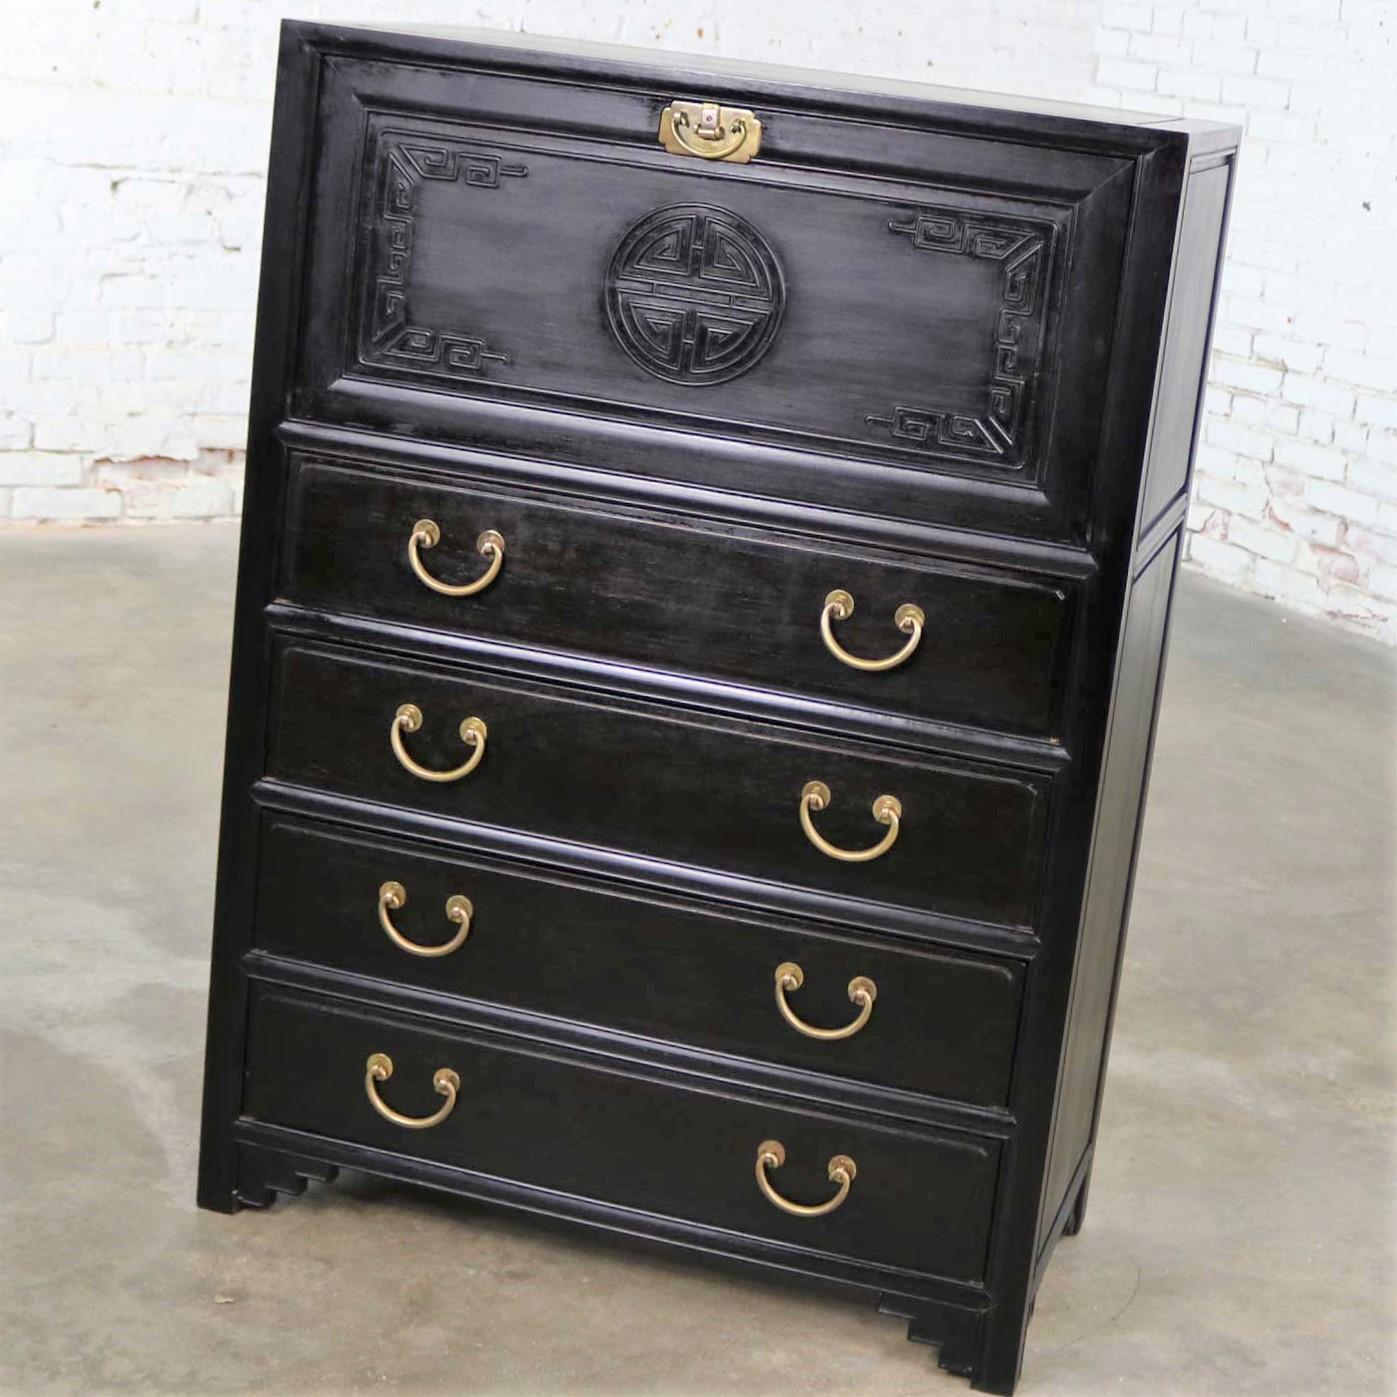 Handsome ebony wood Asian drop front desk or secretary with a carved design on the drop front. It is in wonderful antique condition. Whatever nicks and dings are present we consider part of its beautiful age patina. Please see photos, circa late